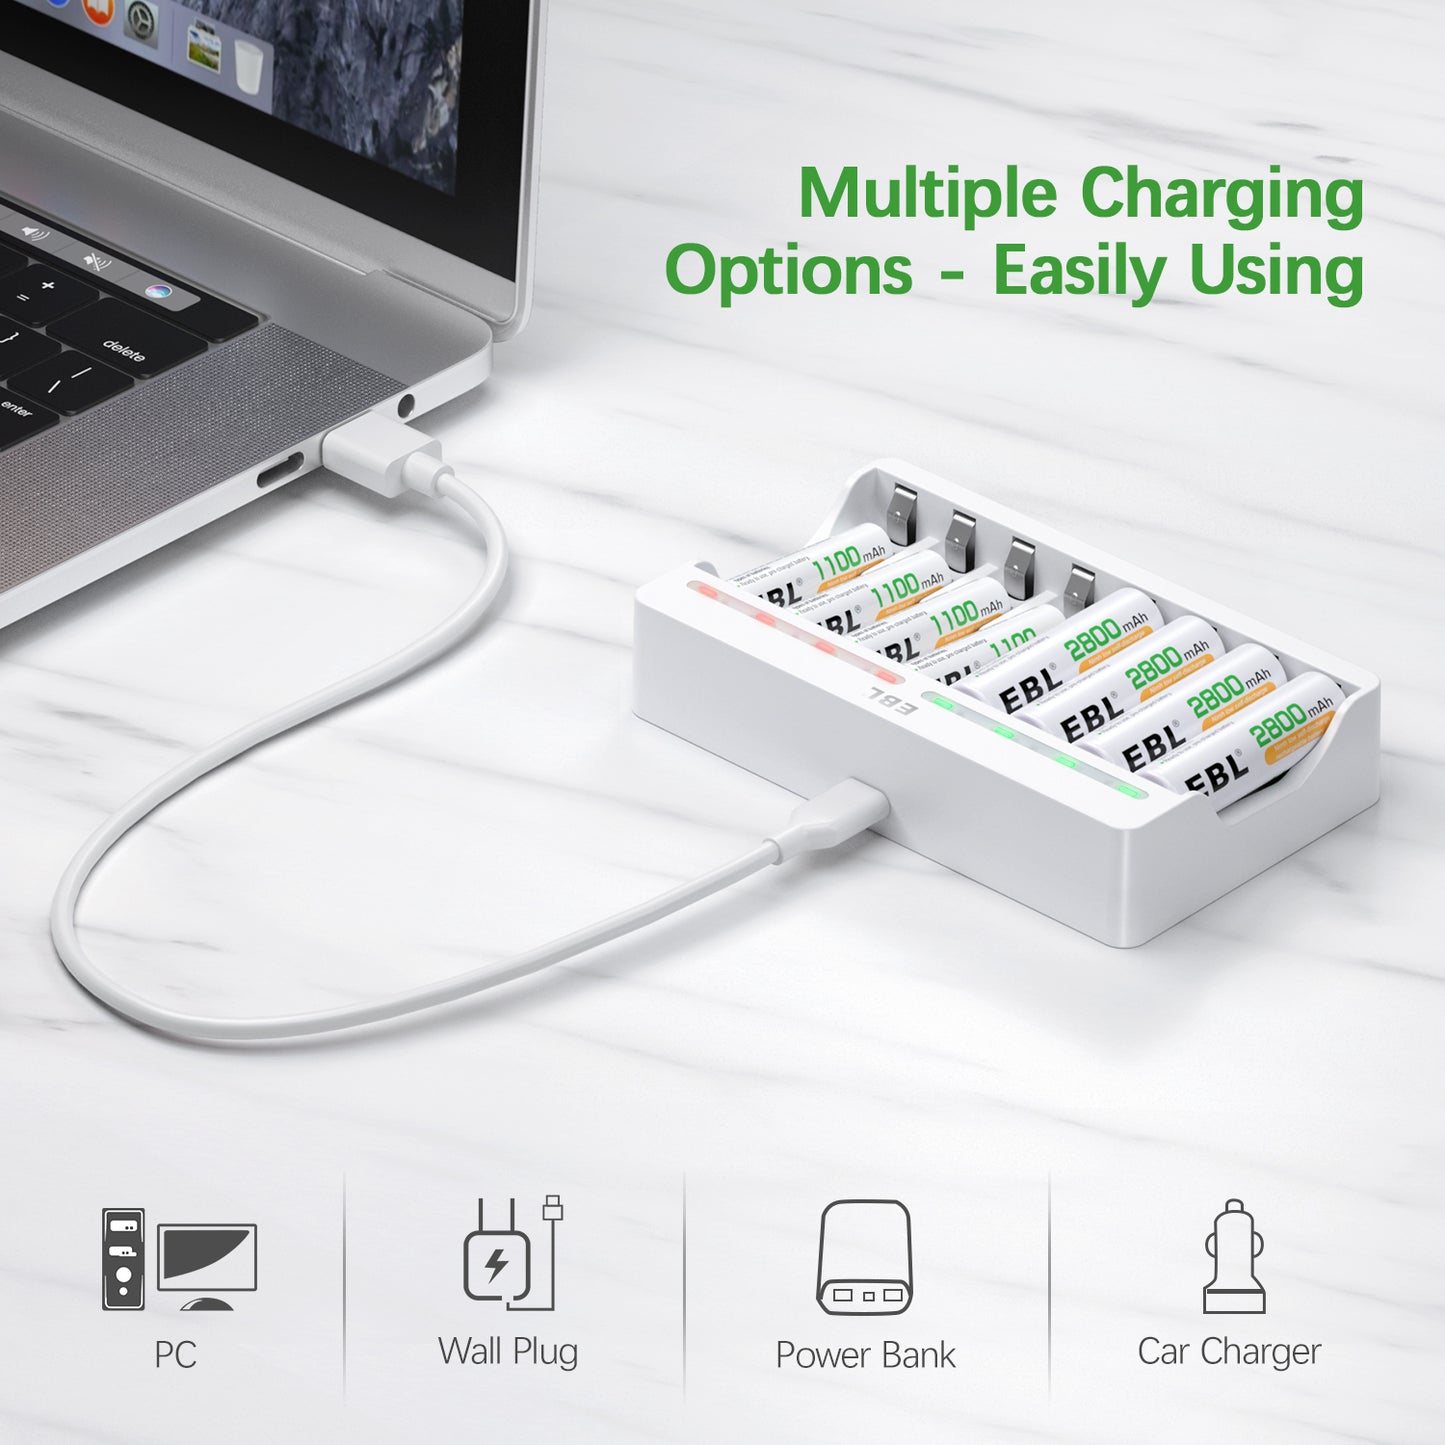 EBL TB-6901 C9010N 8-Bay iQuick Battery Charger with 2A Fast Charging Individually Controlled Slots, LED Status Indicator Lights, and Intelligent Overcharging Protection for AA AAA NiMH Rechargeable Batteries